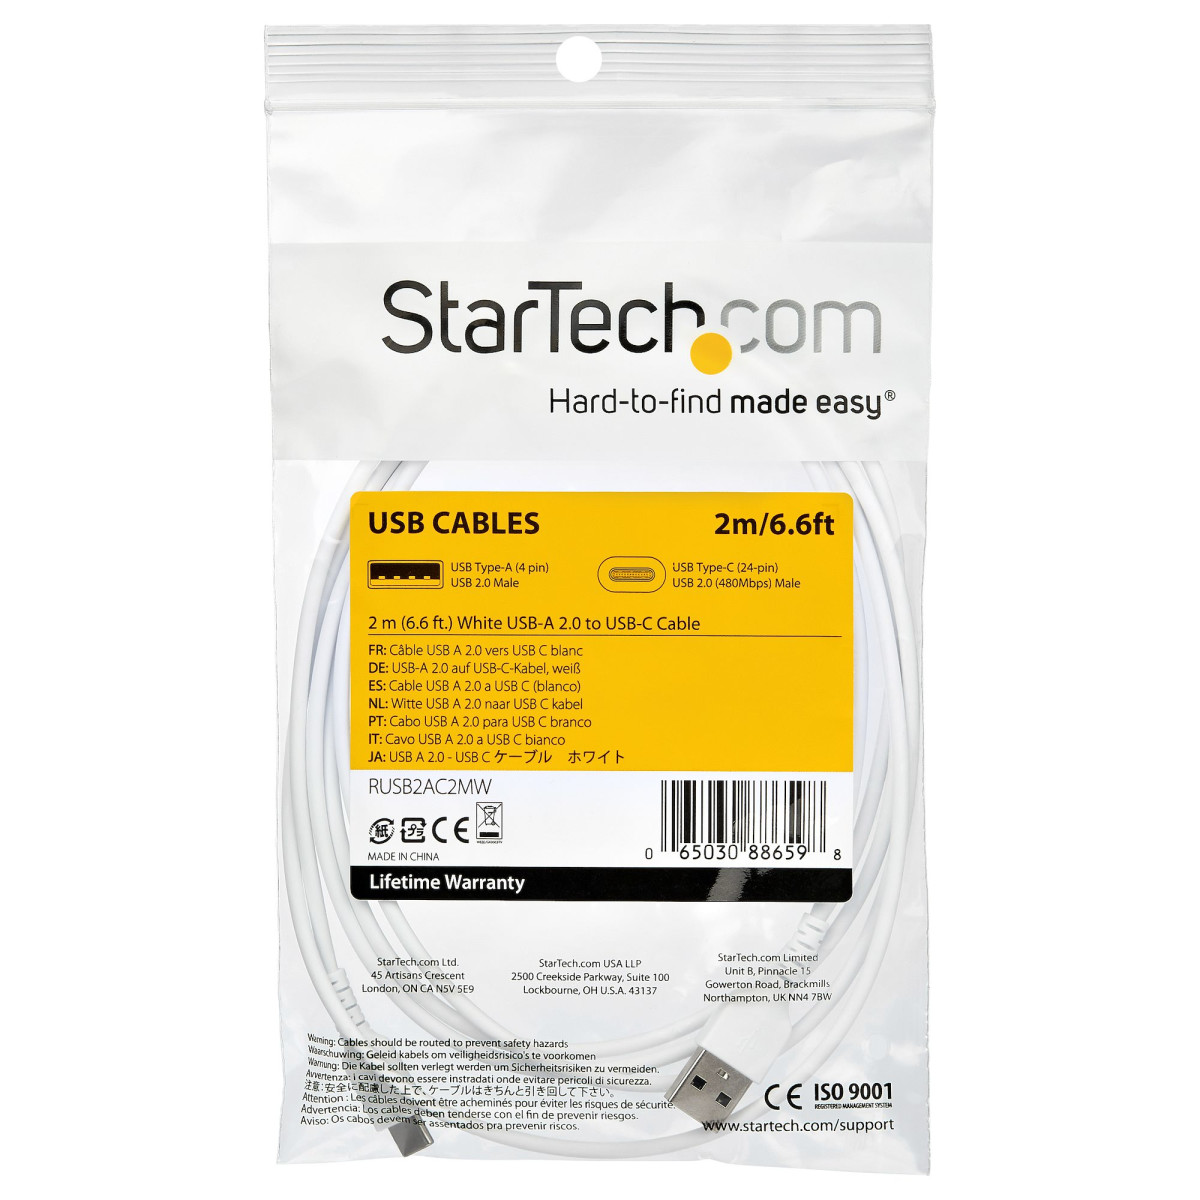 Cable - White USB 2.0 to USB C Cable 2m